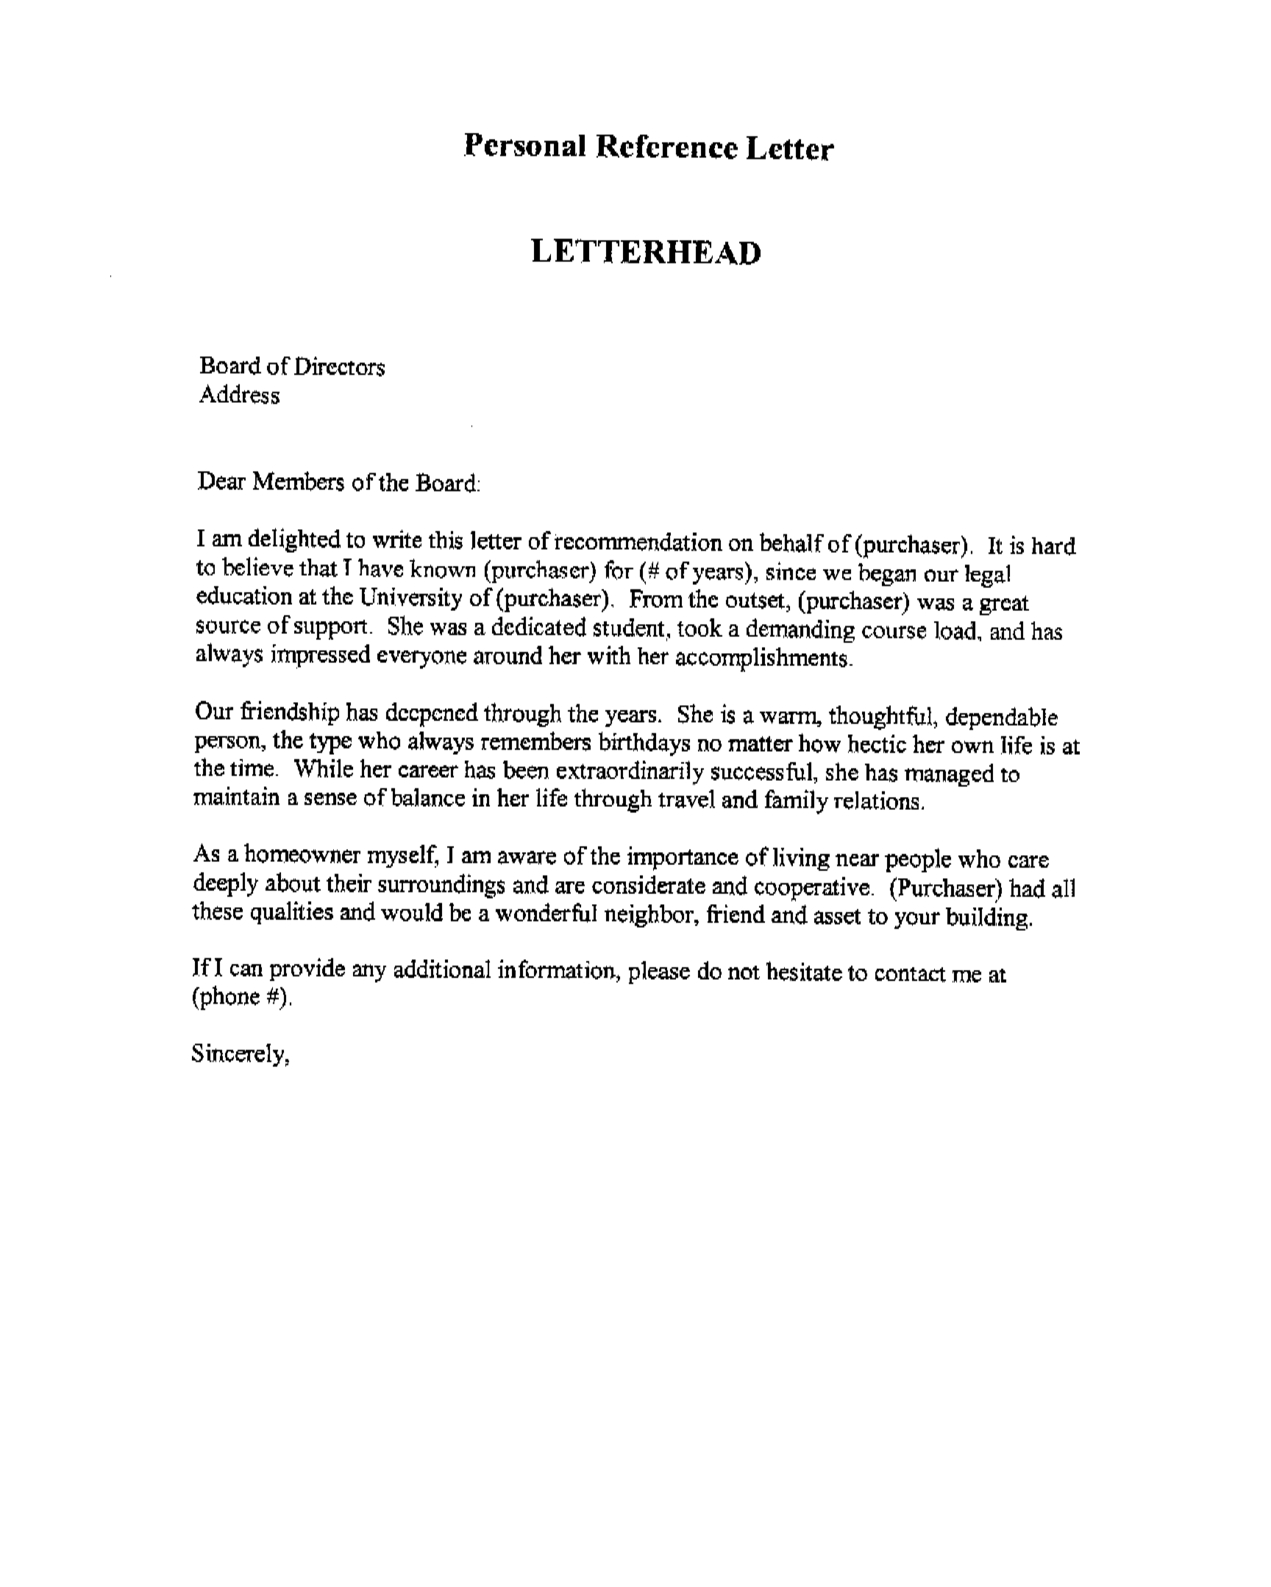 Professional Personal Reference Letter Sample Enom for size 1271 X 1587